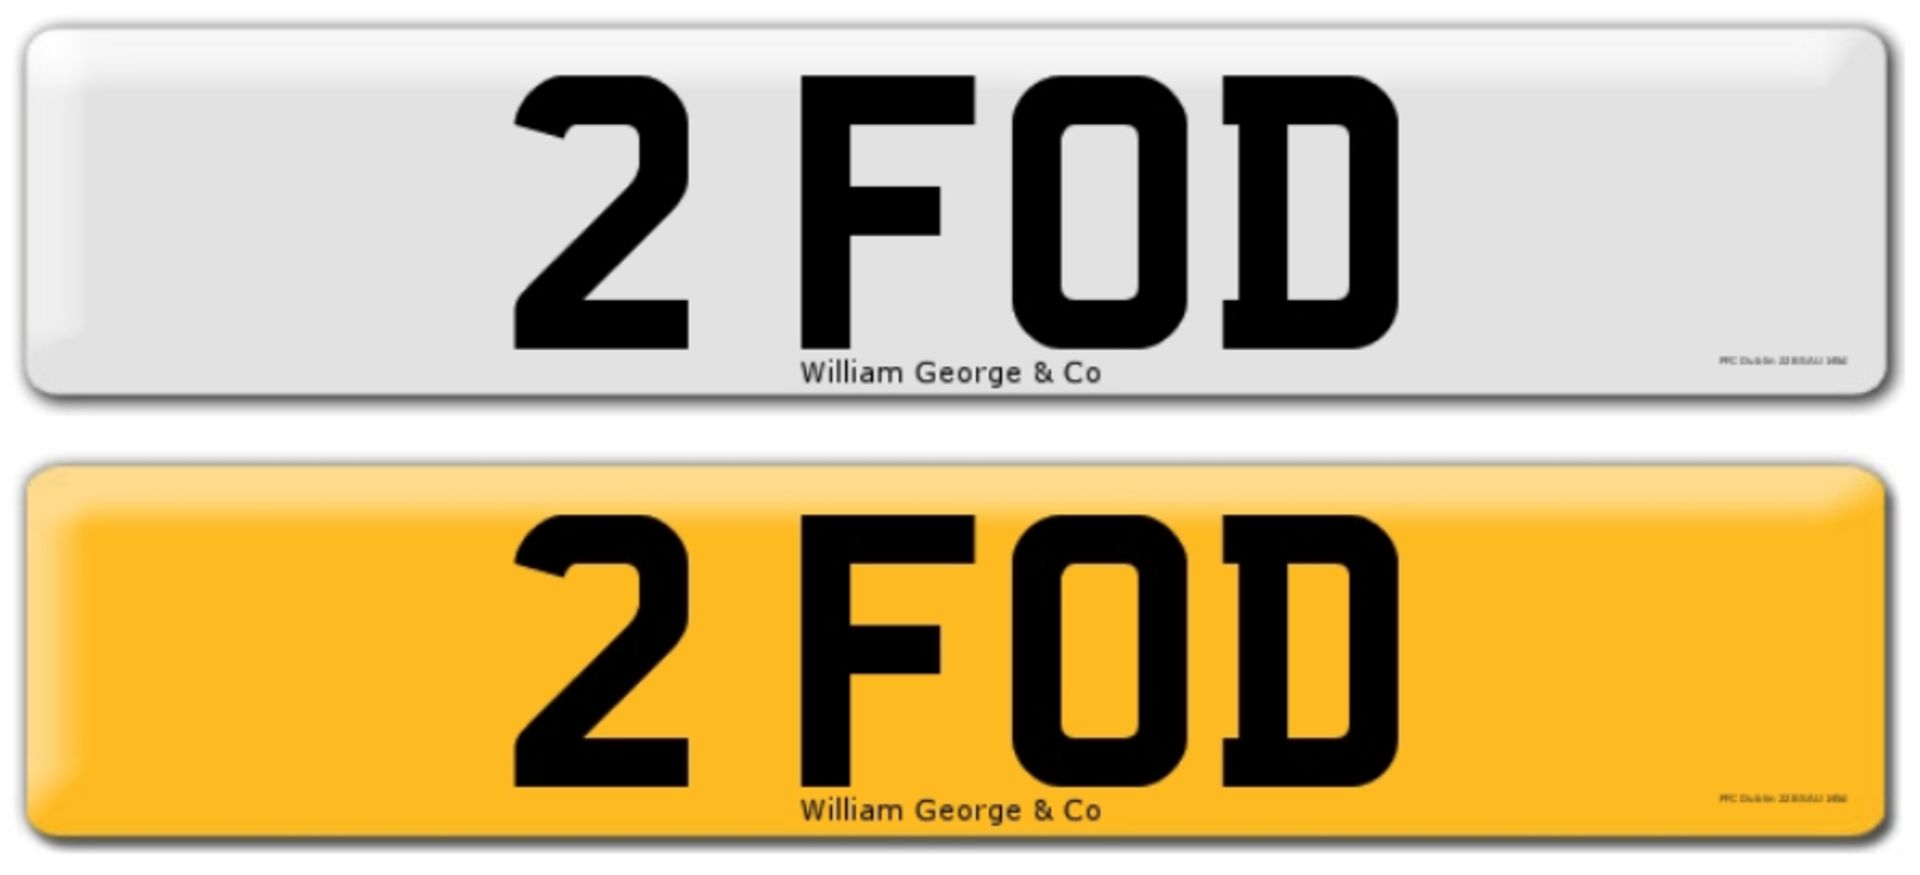 Registration on DVLA retention certificate, ready to transfer 2 FOD, This number plate /